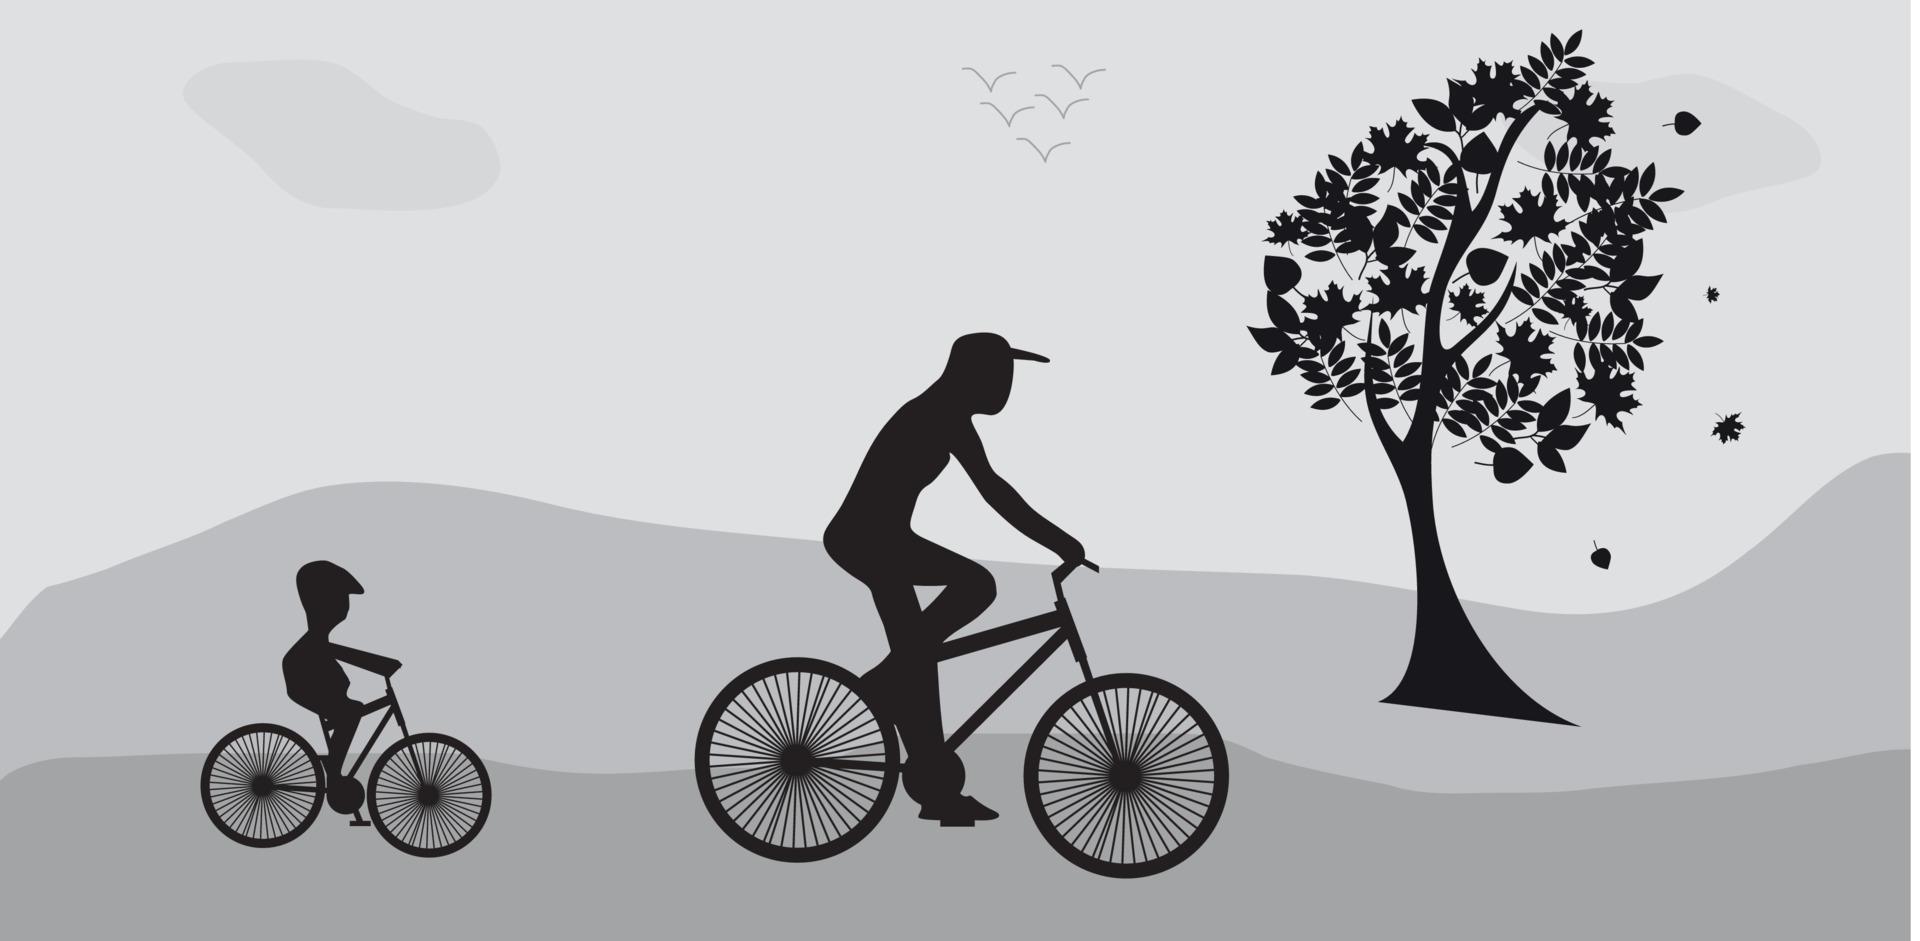 Bikers and the tree. Illustration vector. vector